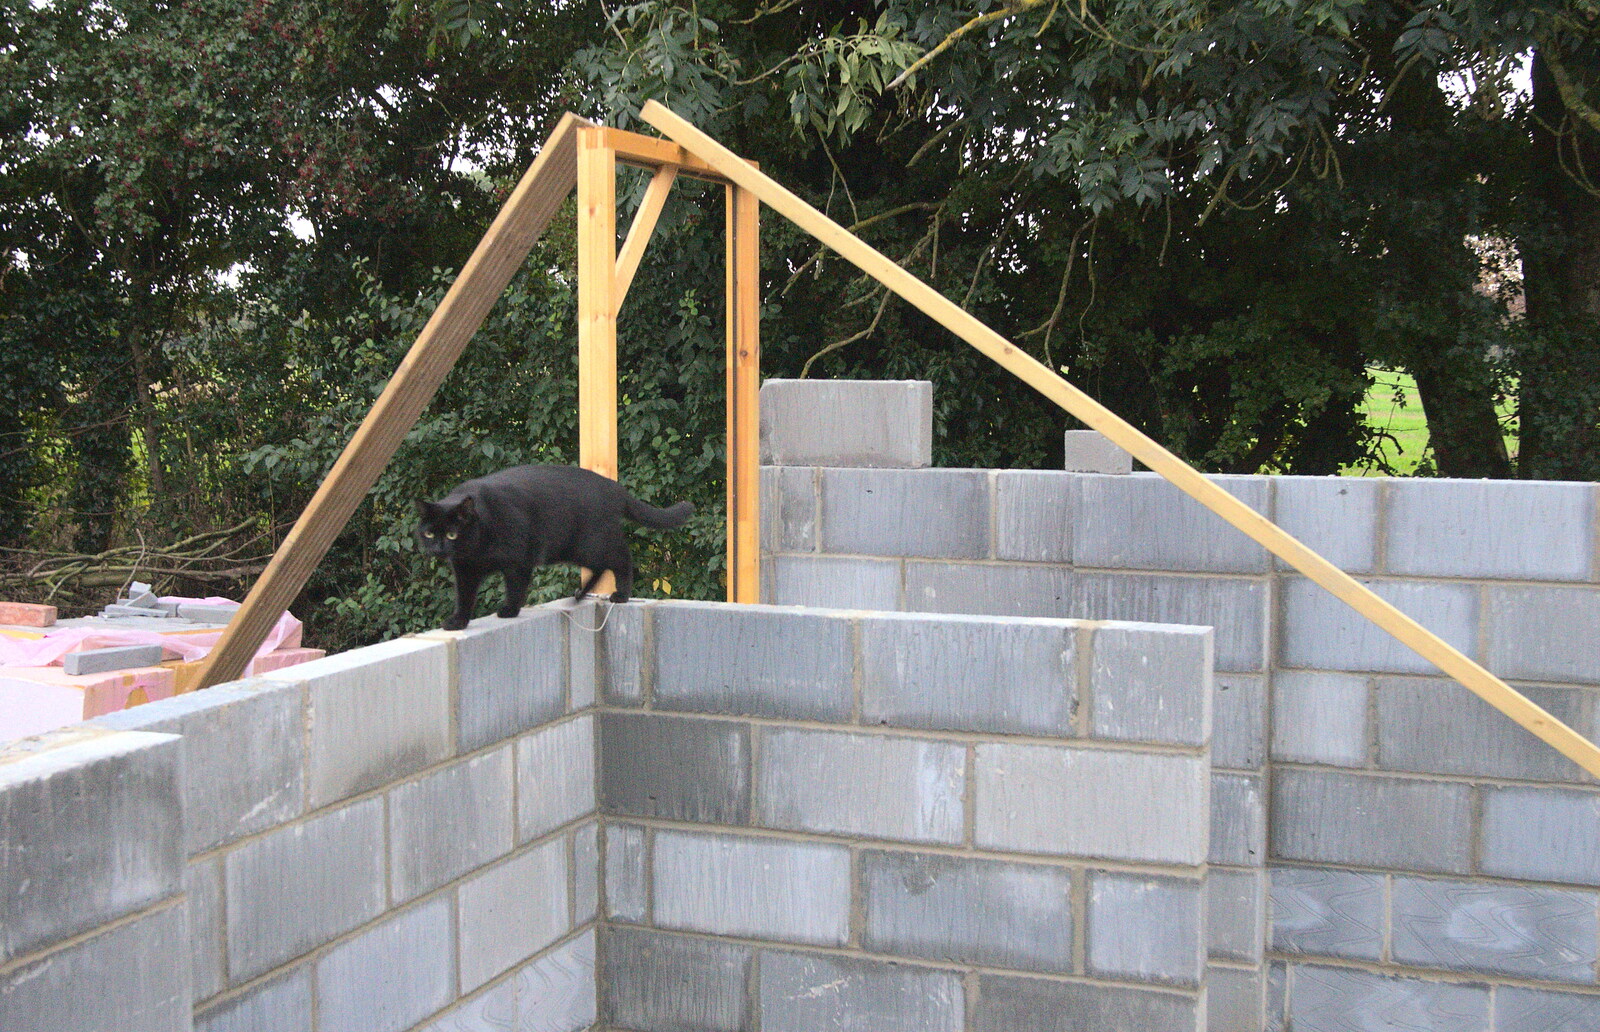 Millie the Mooch walks the walls from A Building Site Update, Brome, Suffolk - 13th October 2013